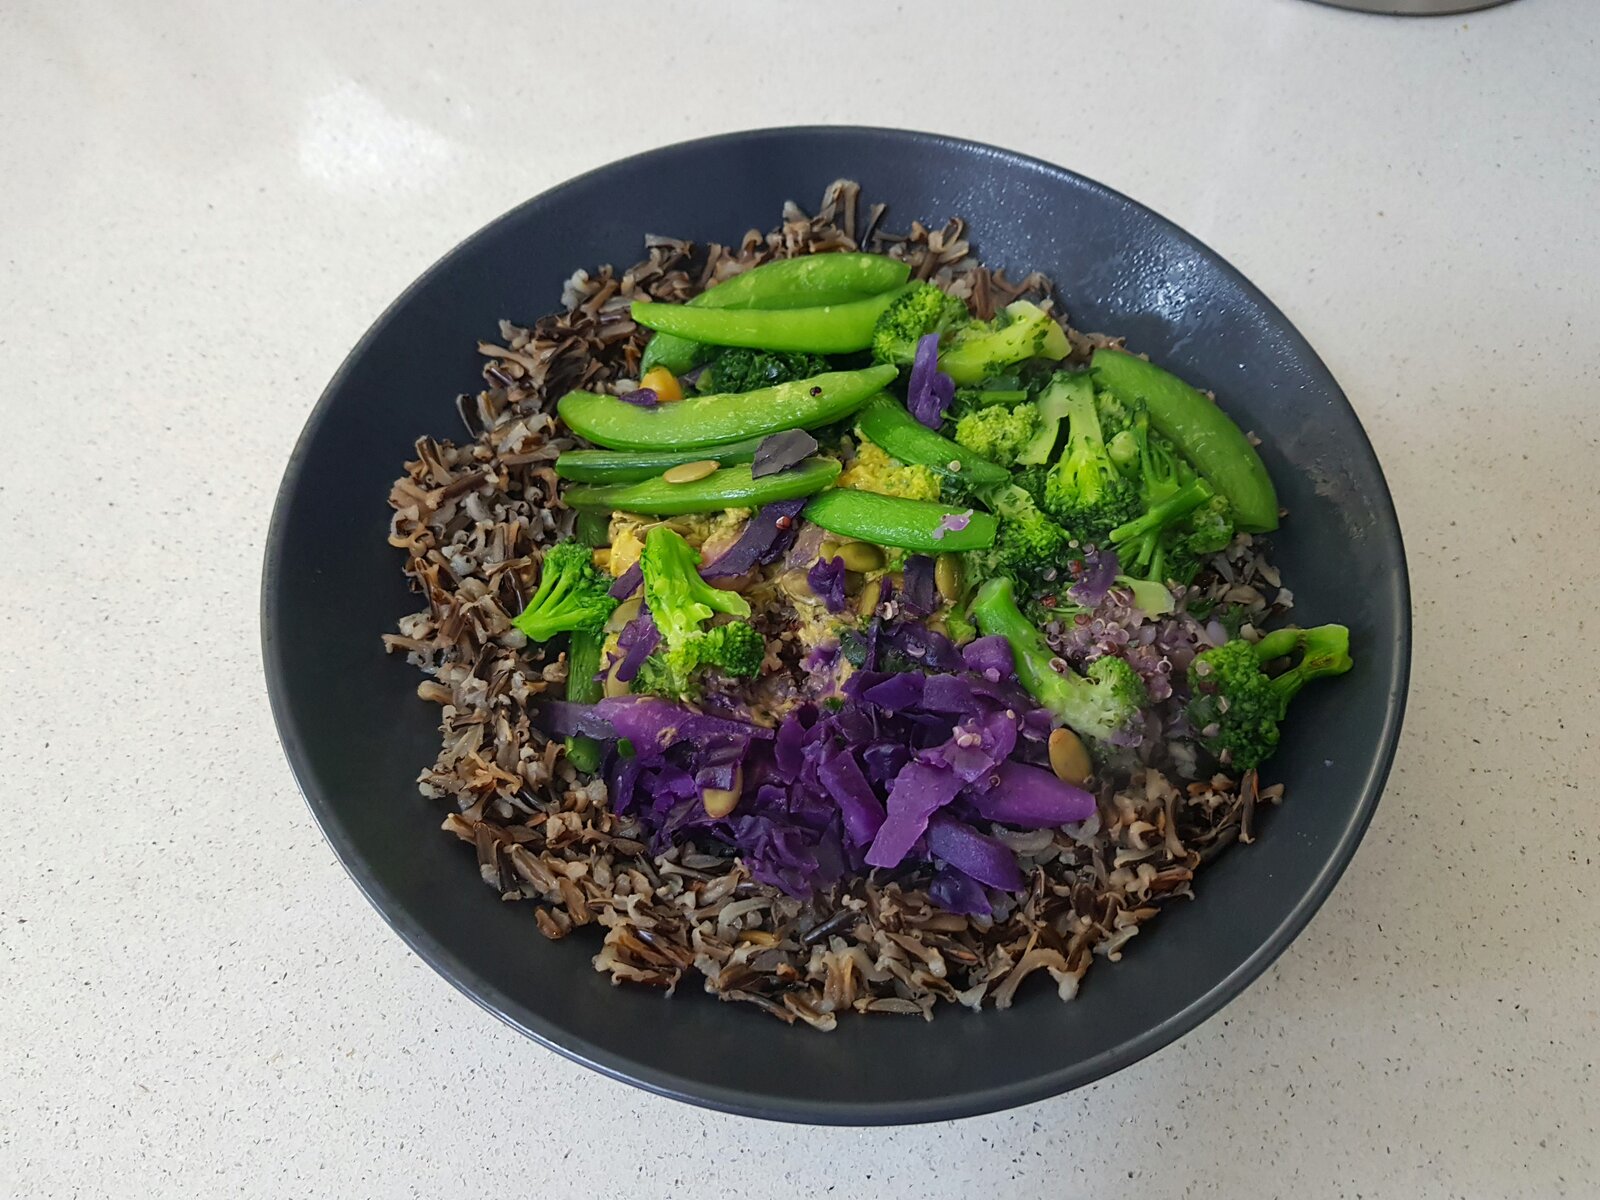 Vegan meal in a bowl with additional wild rice